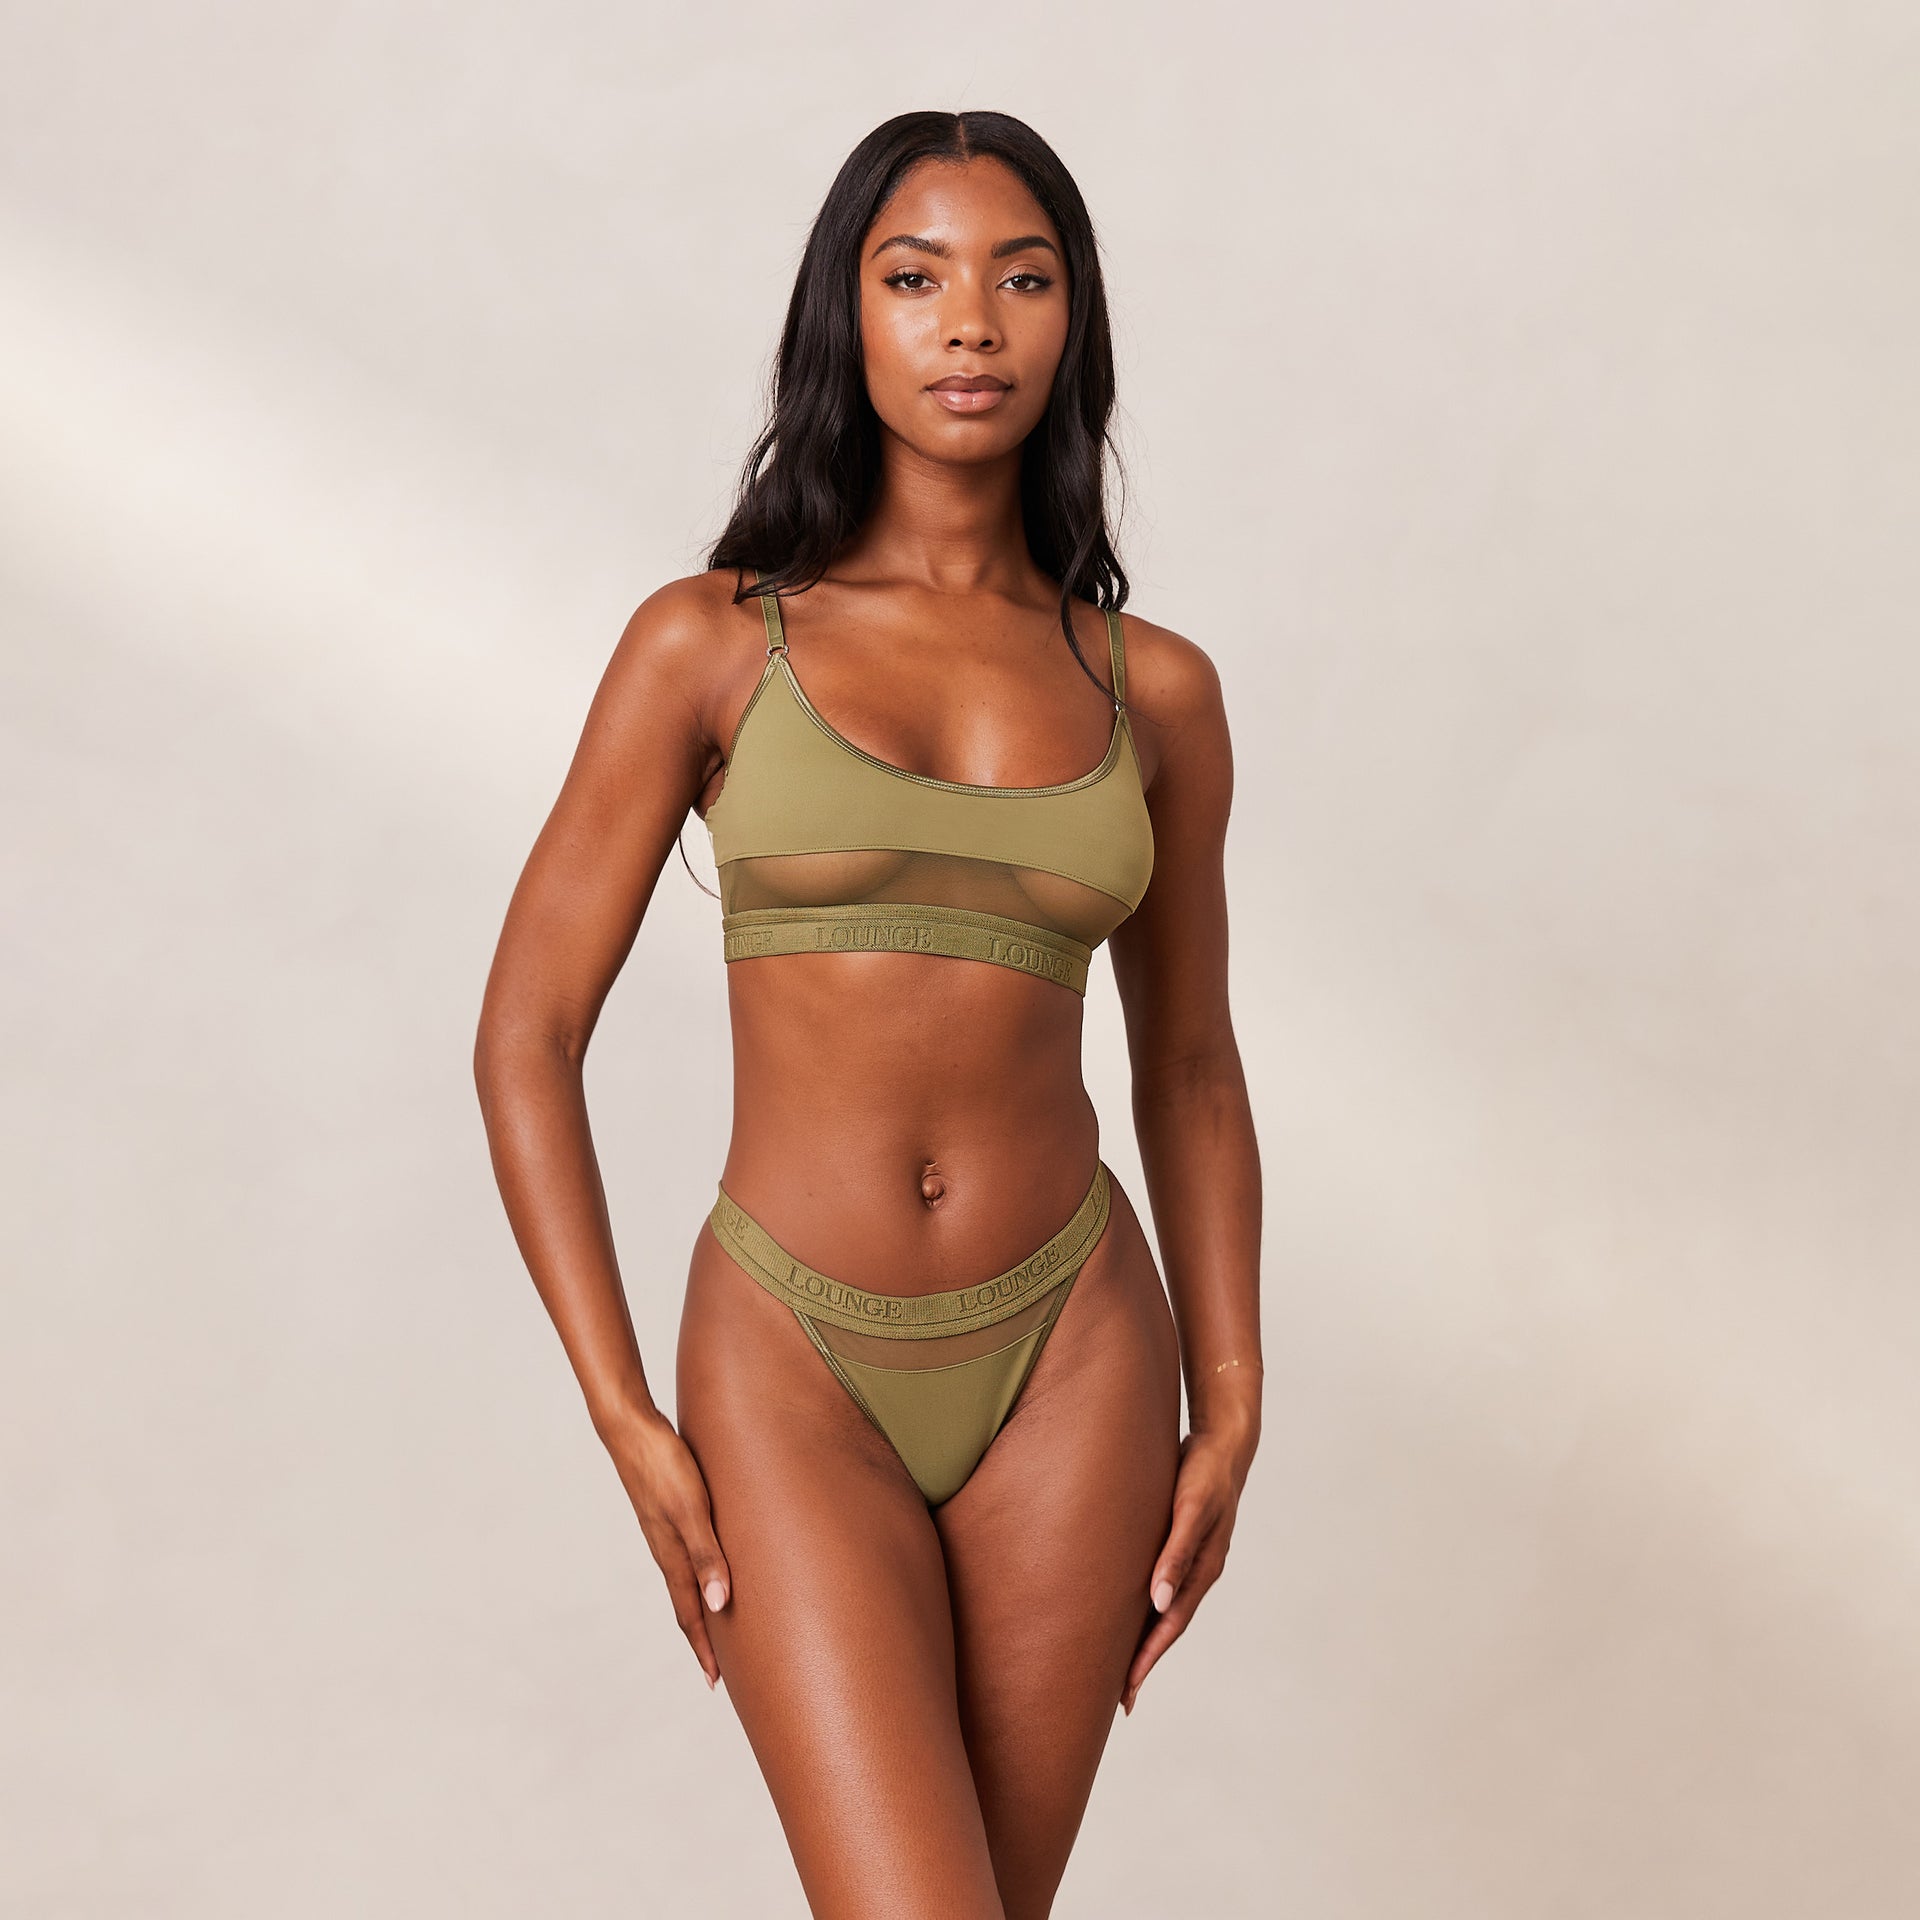 Winter Mesh Underwear Set: Thin, Breathable, Comfortable Bra & Thong With  Mousse From Shacksla, $17.55